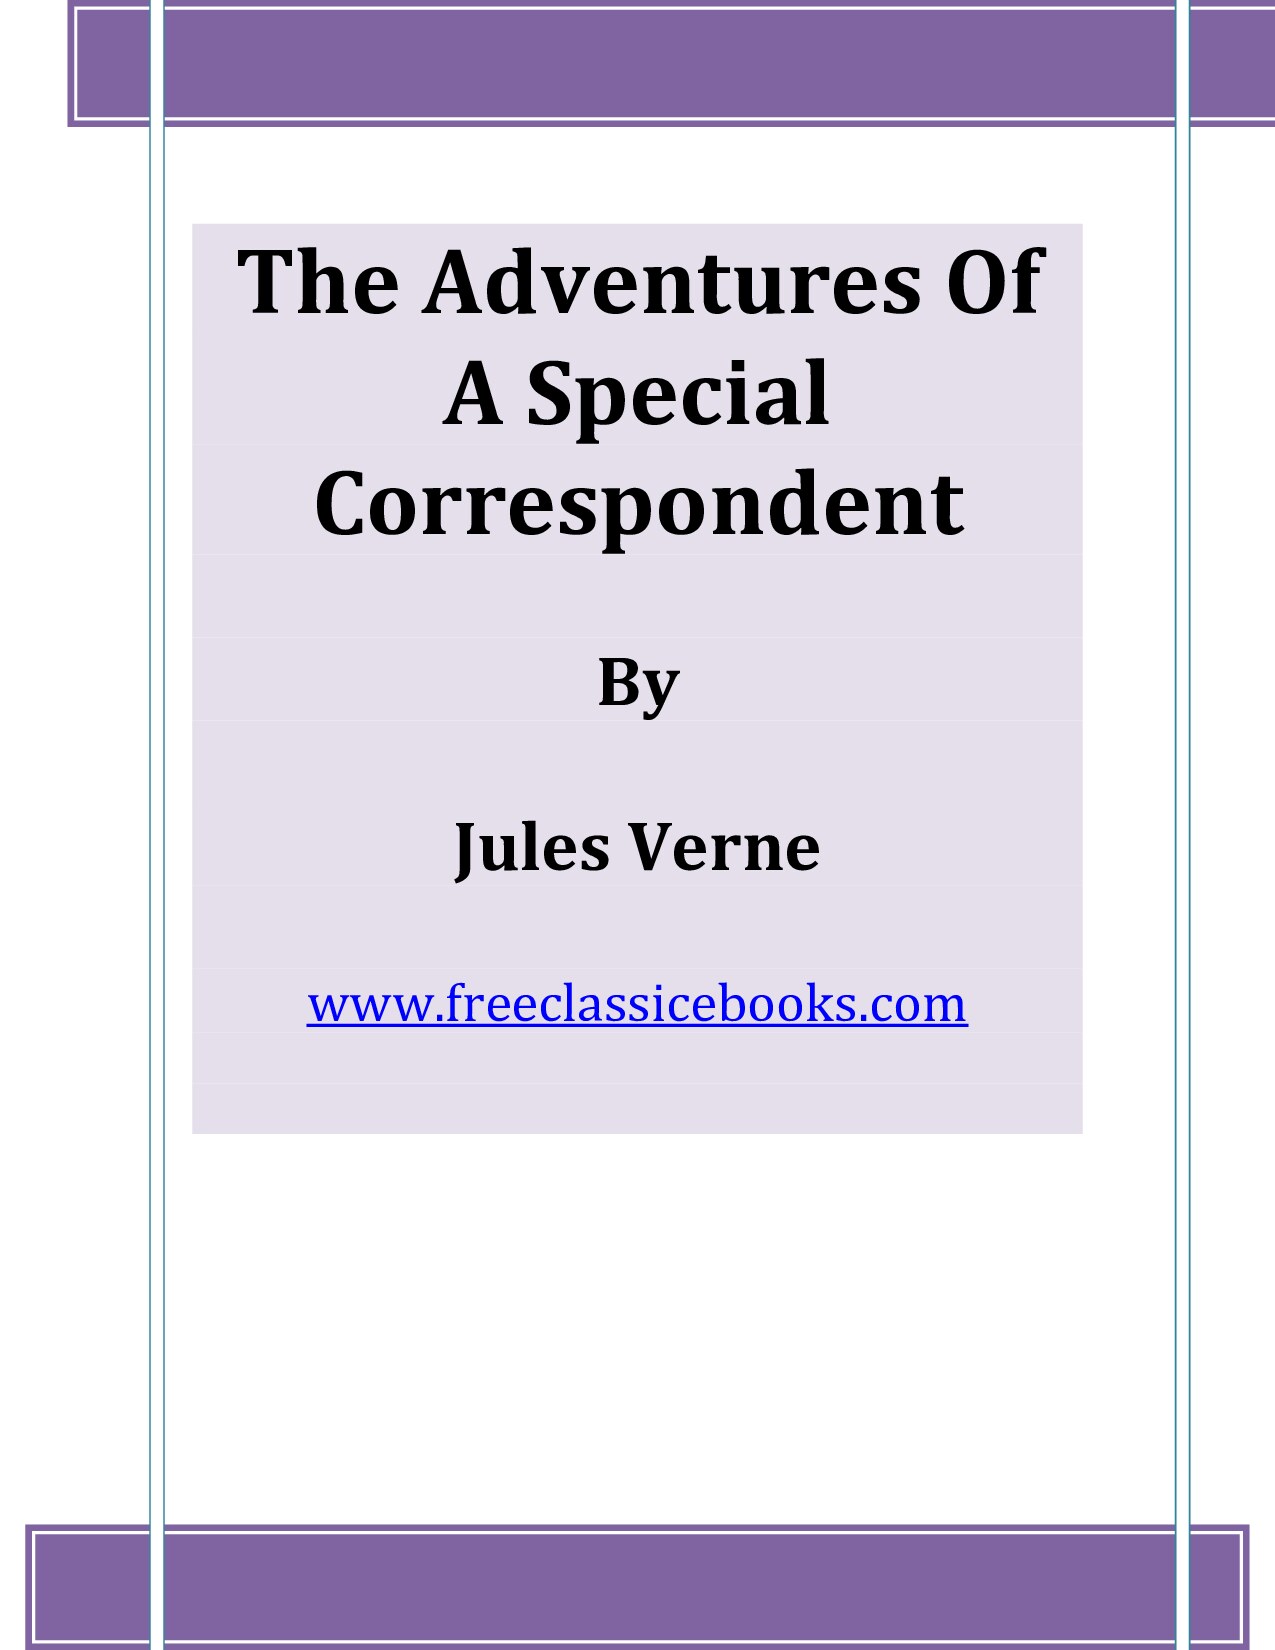 Microsoft Word - The Adventures Of A Special Correspondent.doc